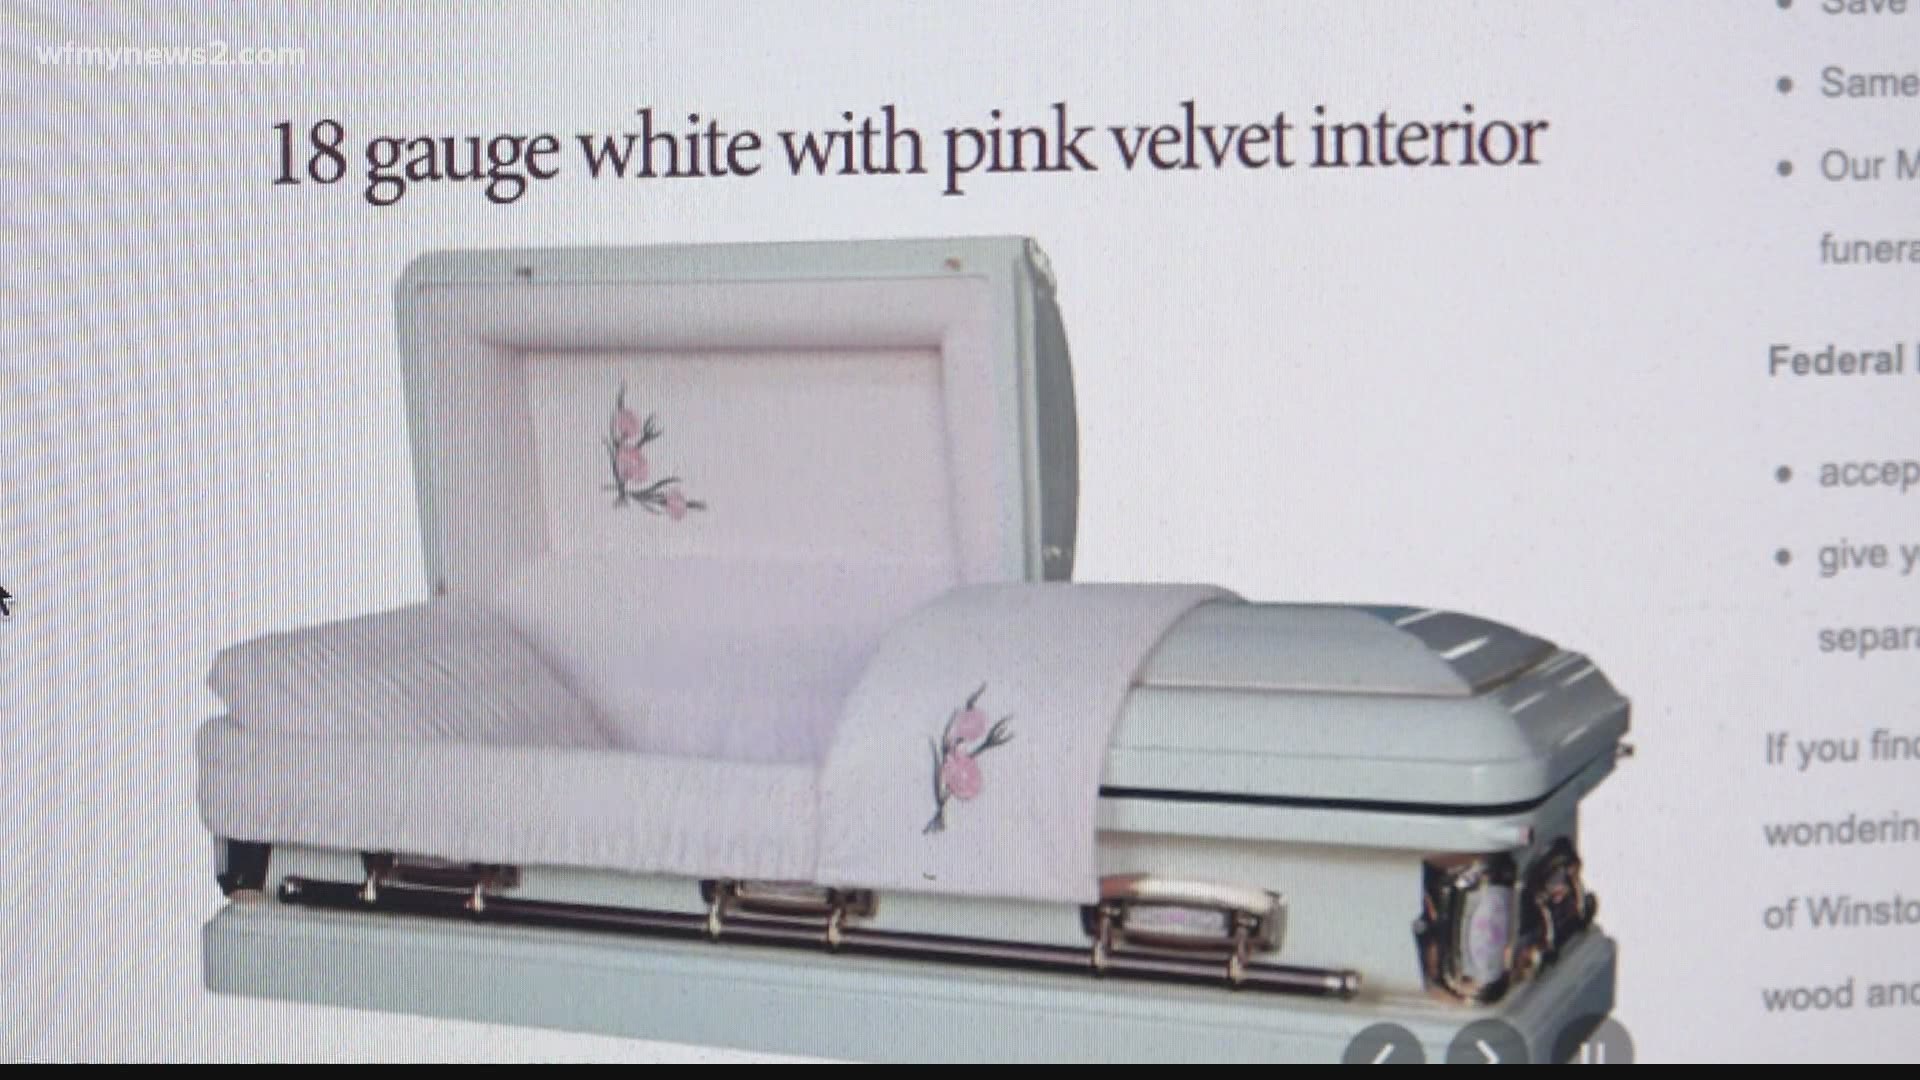 Bryan Little said his company is running out of available caskets for grieving families.